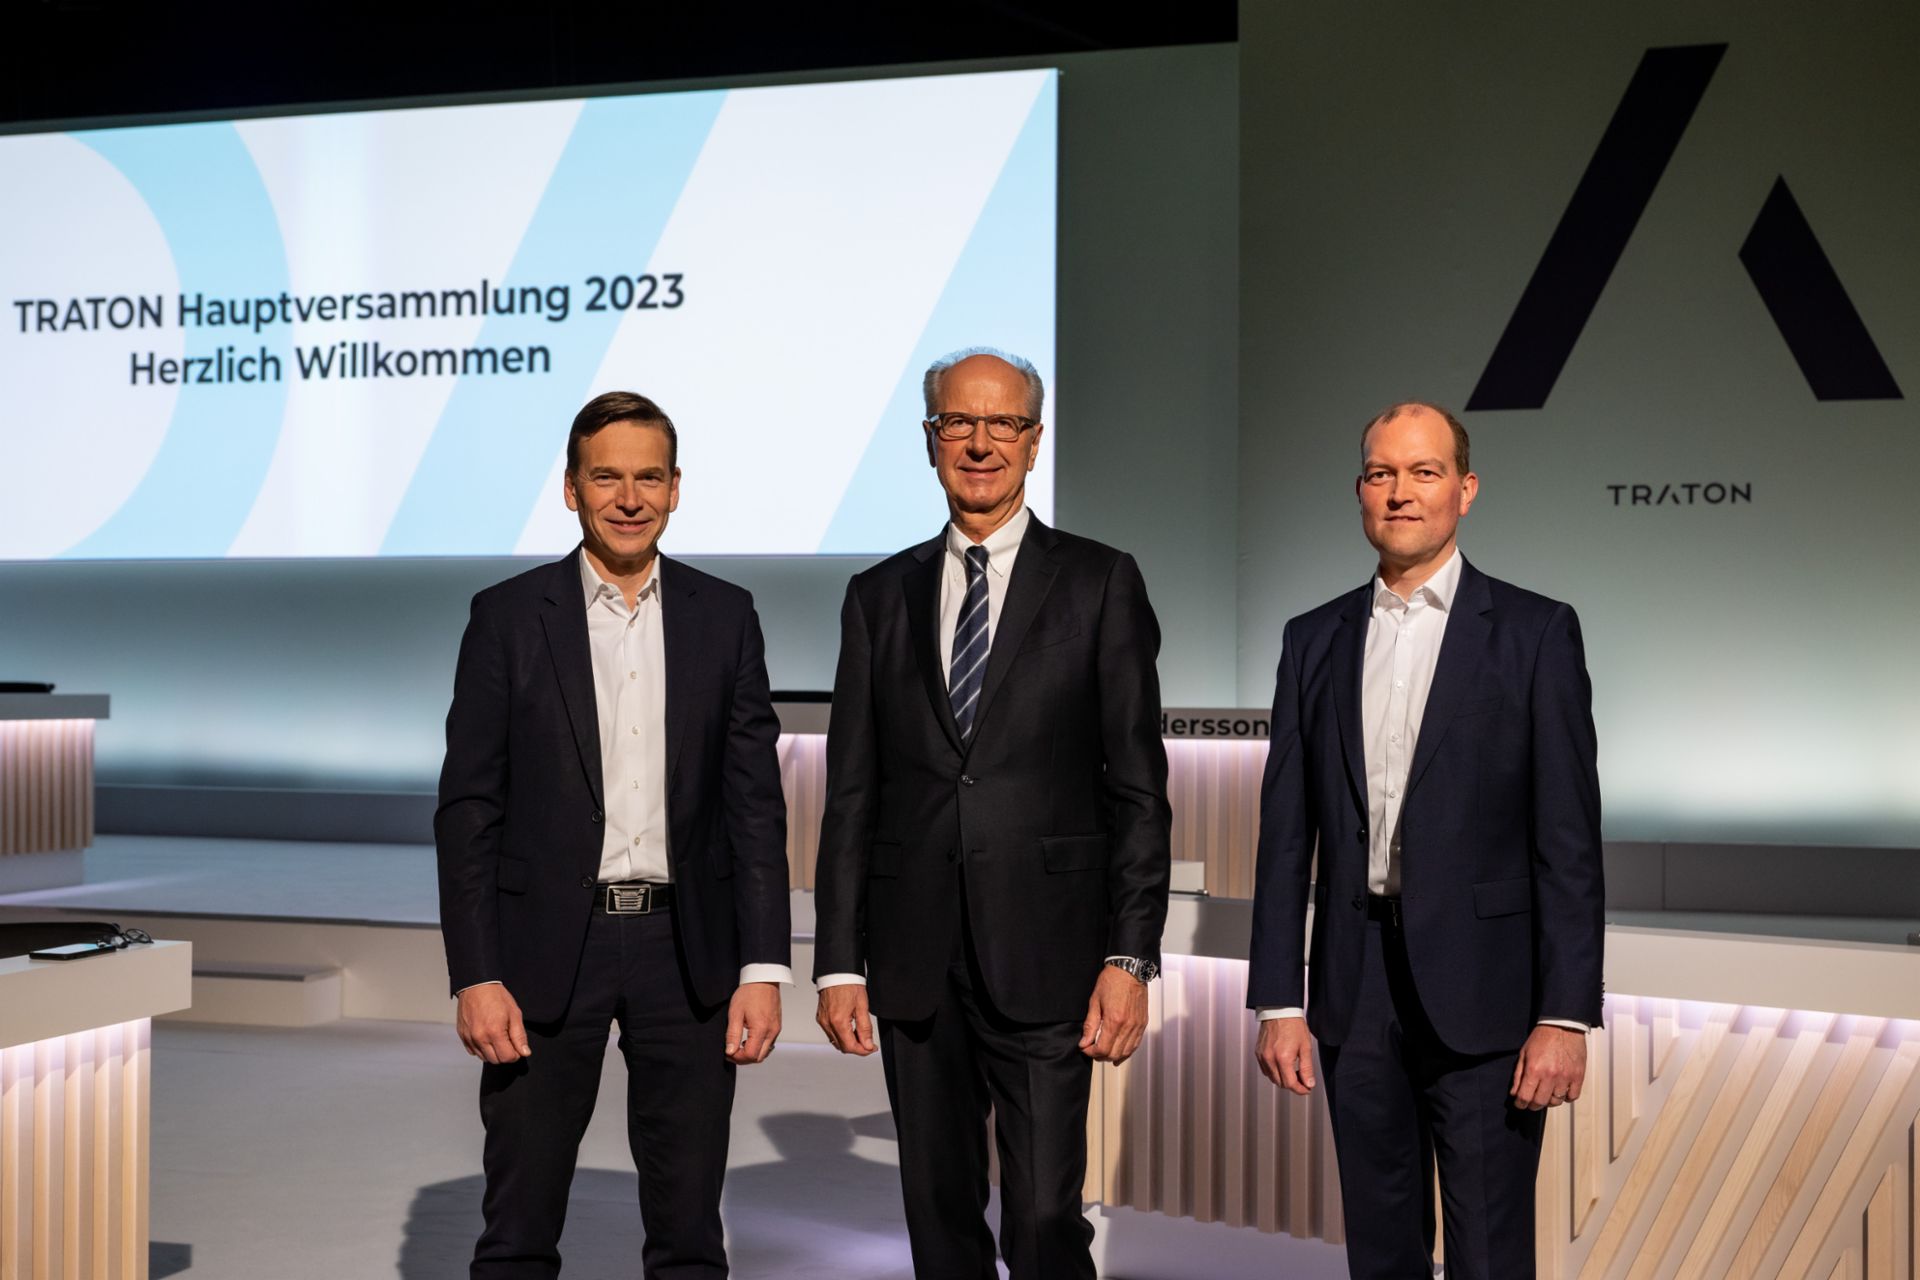 TRATON Annual General Meeting 2023 in Munich (l-r): Christian Levin (Chief Executive Officer of TRATON SE), Hans Dieter Pötsch (Chairman of the Supervisory Board of TRATON SE) and Dr. Michael Jackstein (Member of the Executive Board of TRATON SE, responsible for Finance and Business Development as well as Human Resources)